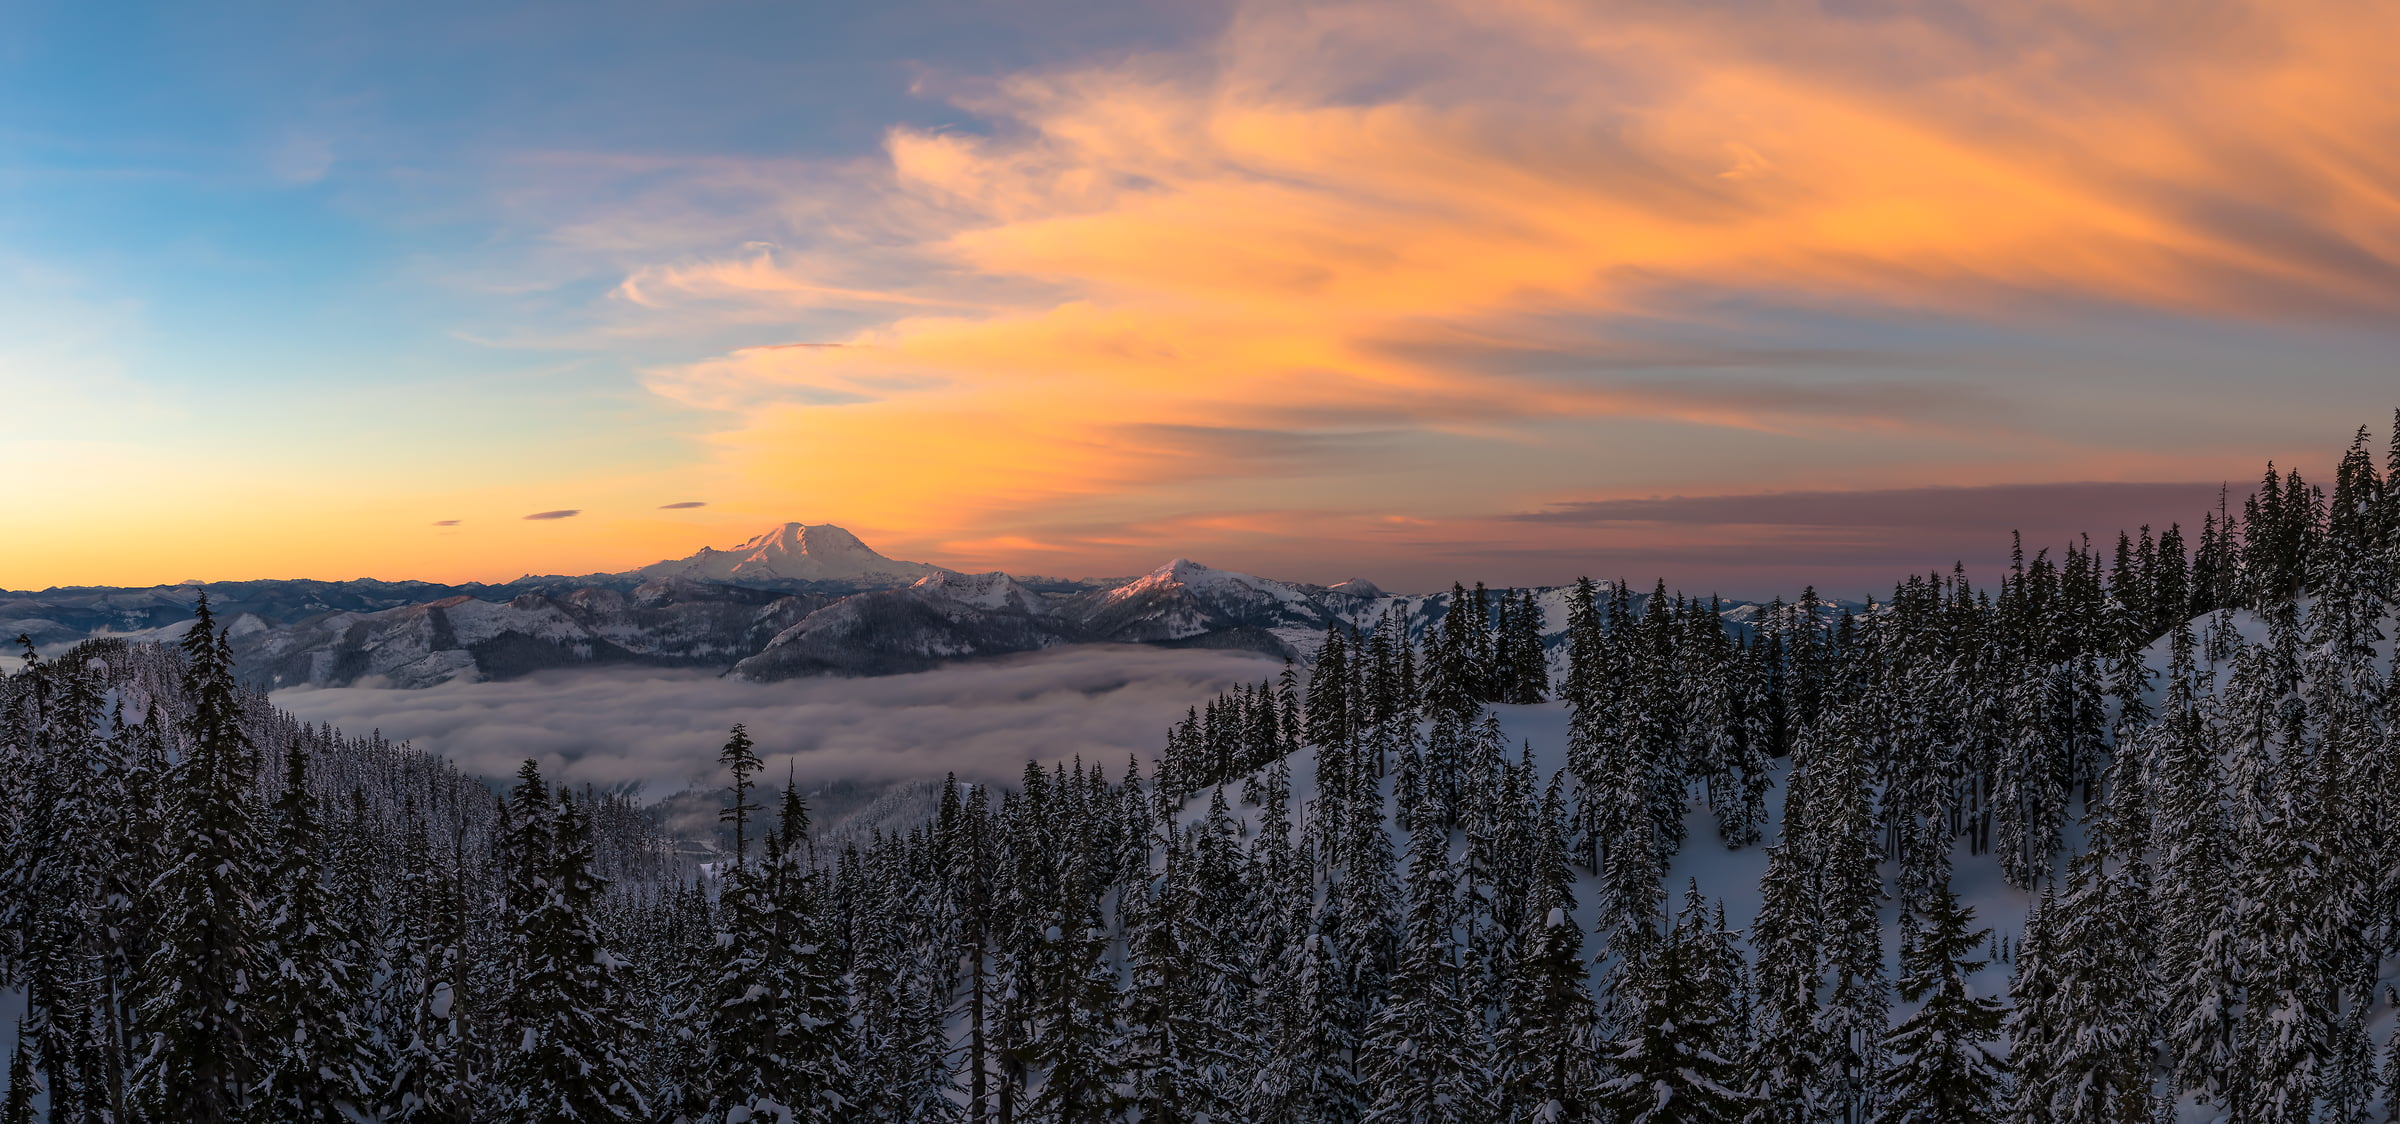 99 megapixels! A very high resolution, large-format VAST photo print of Mount Rainier and the Cascade Mountains; fine art landscape photo created by Scott Rinckenberger from Kendall Peak in Washington, USA.